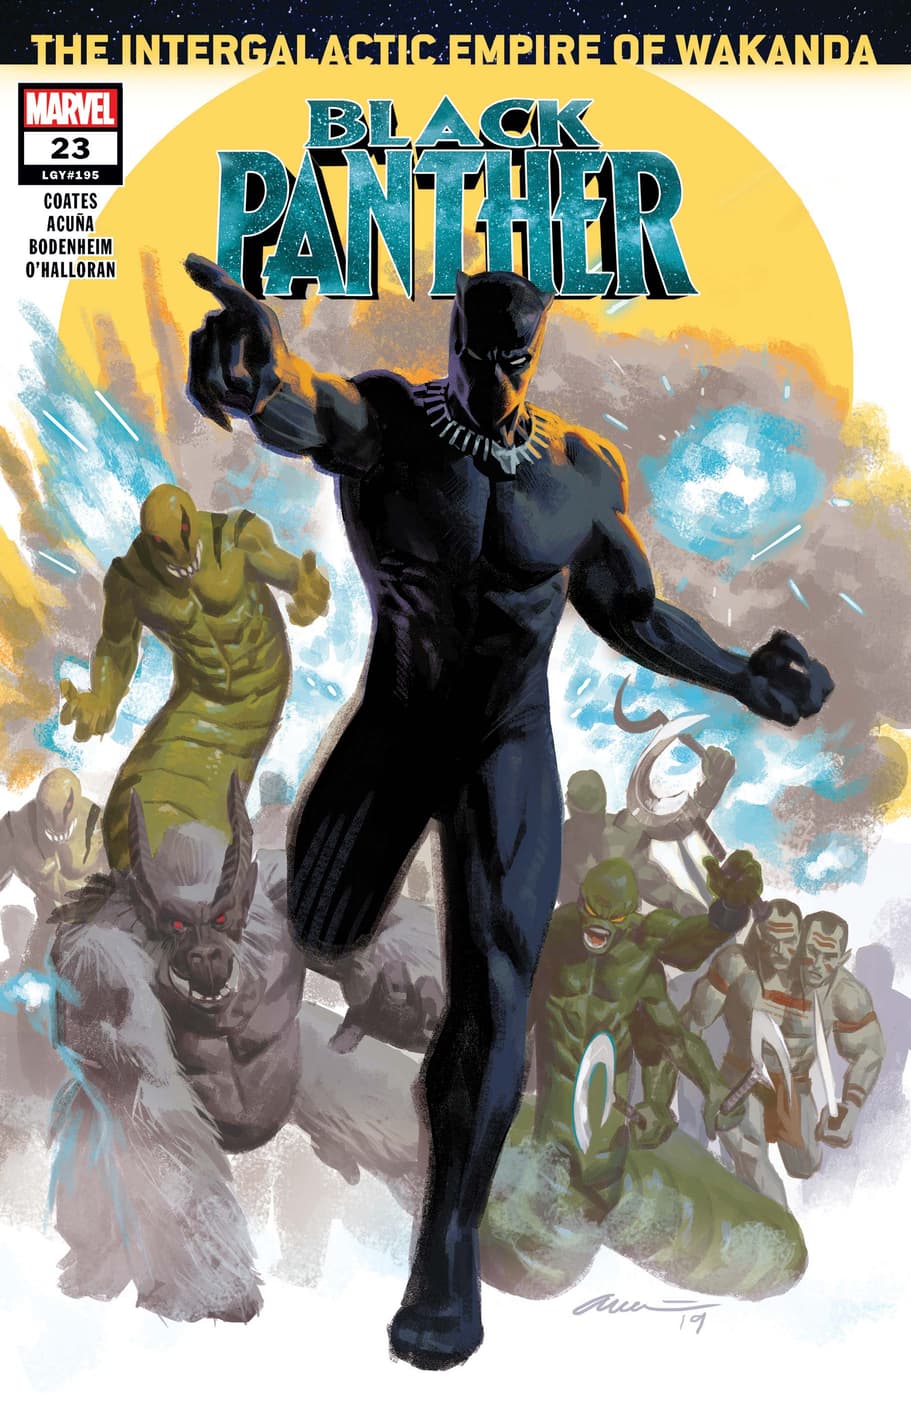 Cover to BLACK PANTHER (2018) #23.